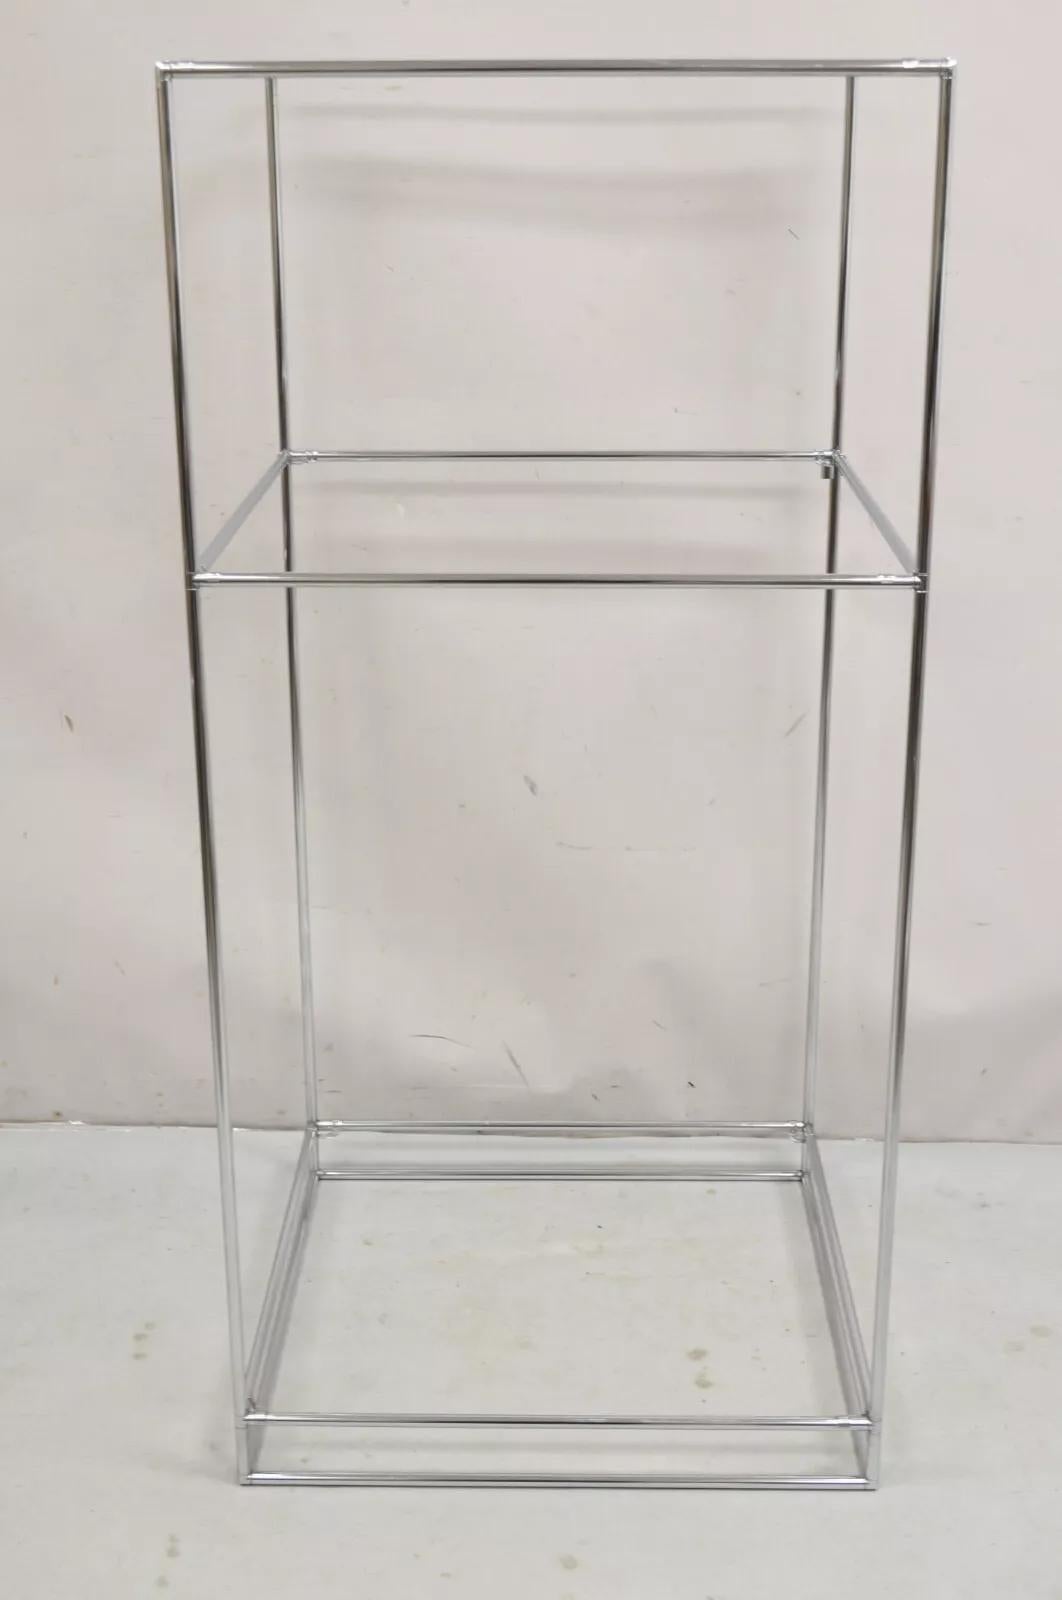 Abstracta Modular Shelf by Poul Cadovius for Royal System Smoked Glass - 2 Pcs For Sale 3